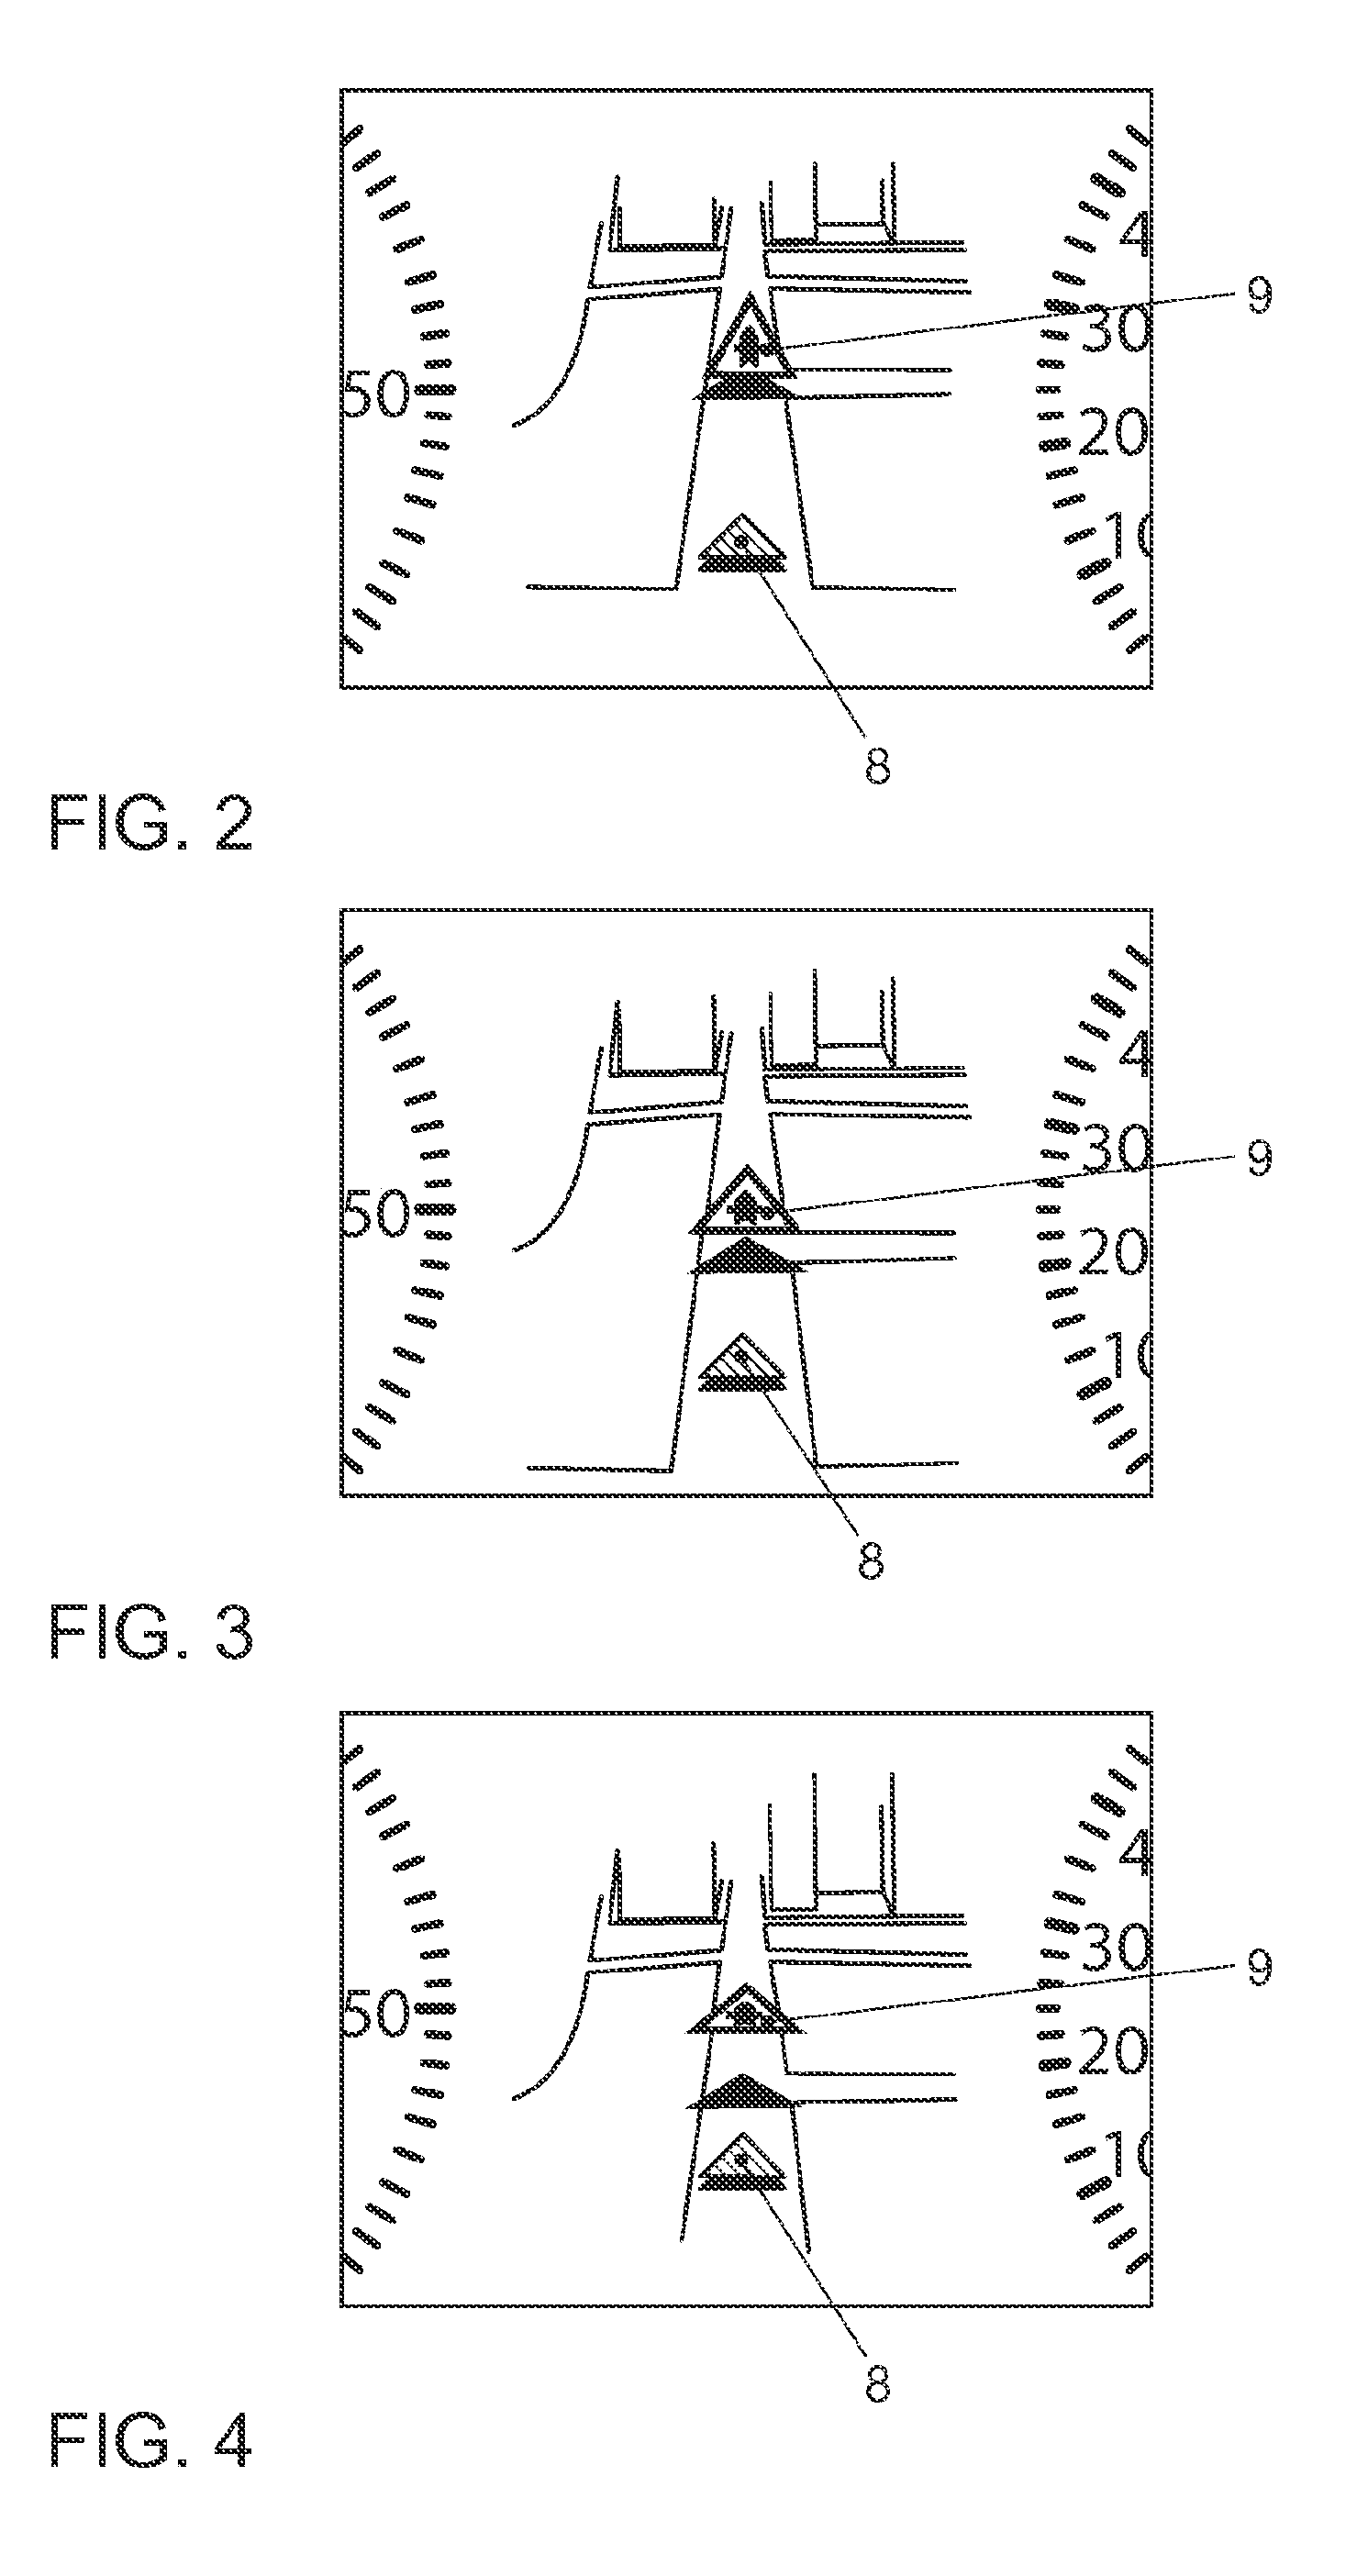 Method and Device for Displaying Information in a Vehicle